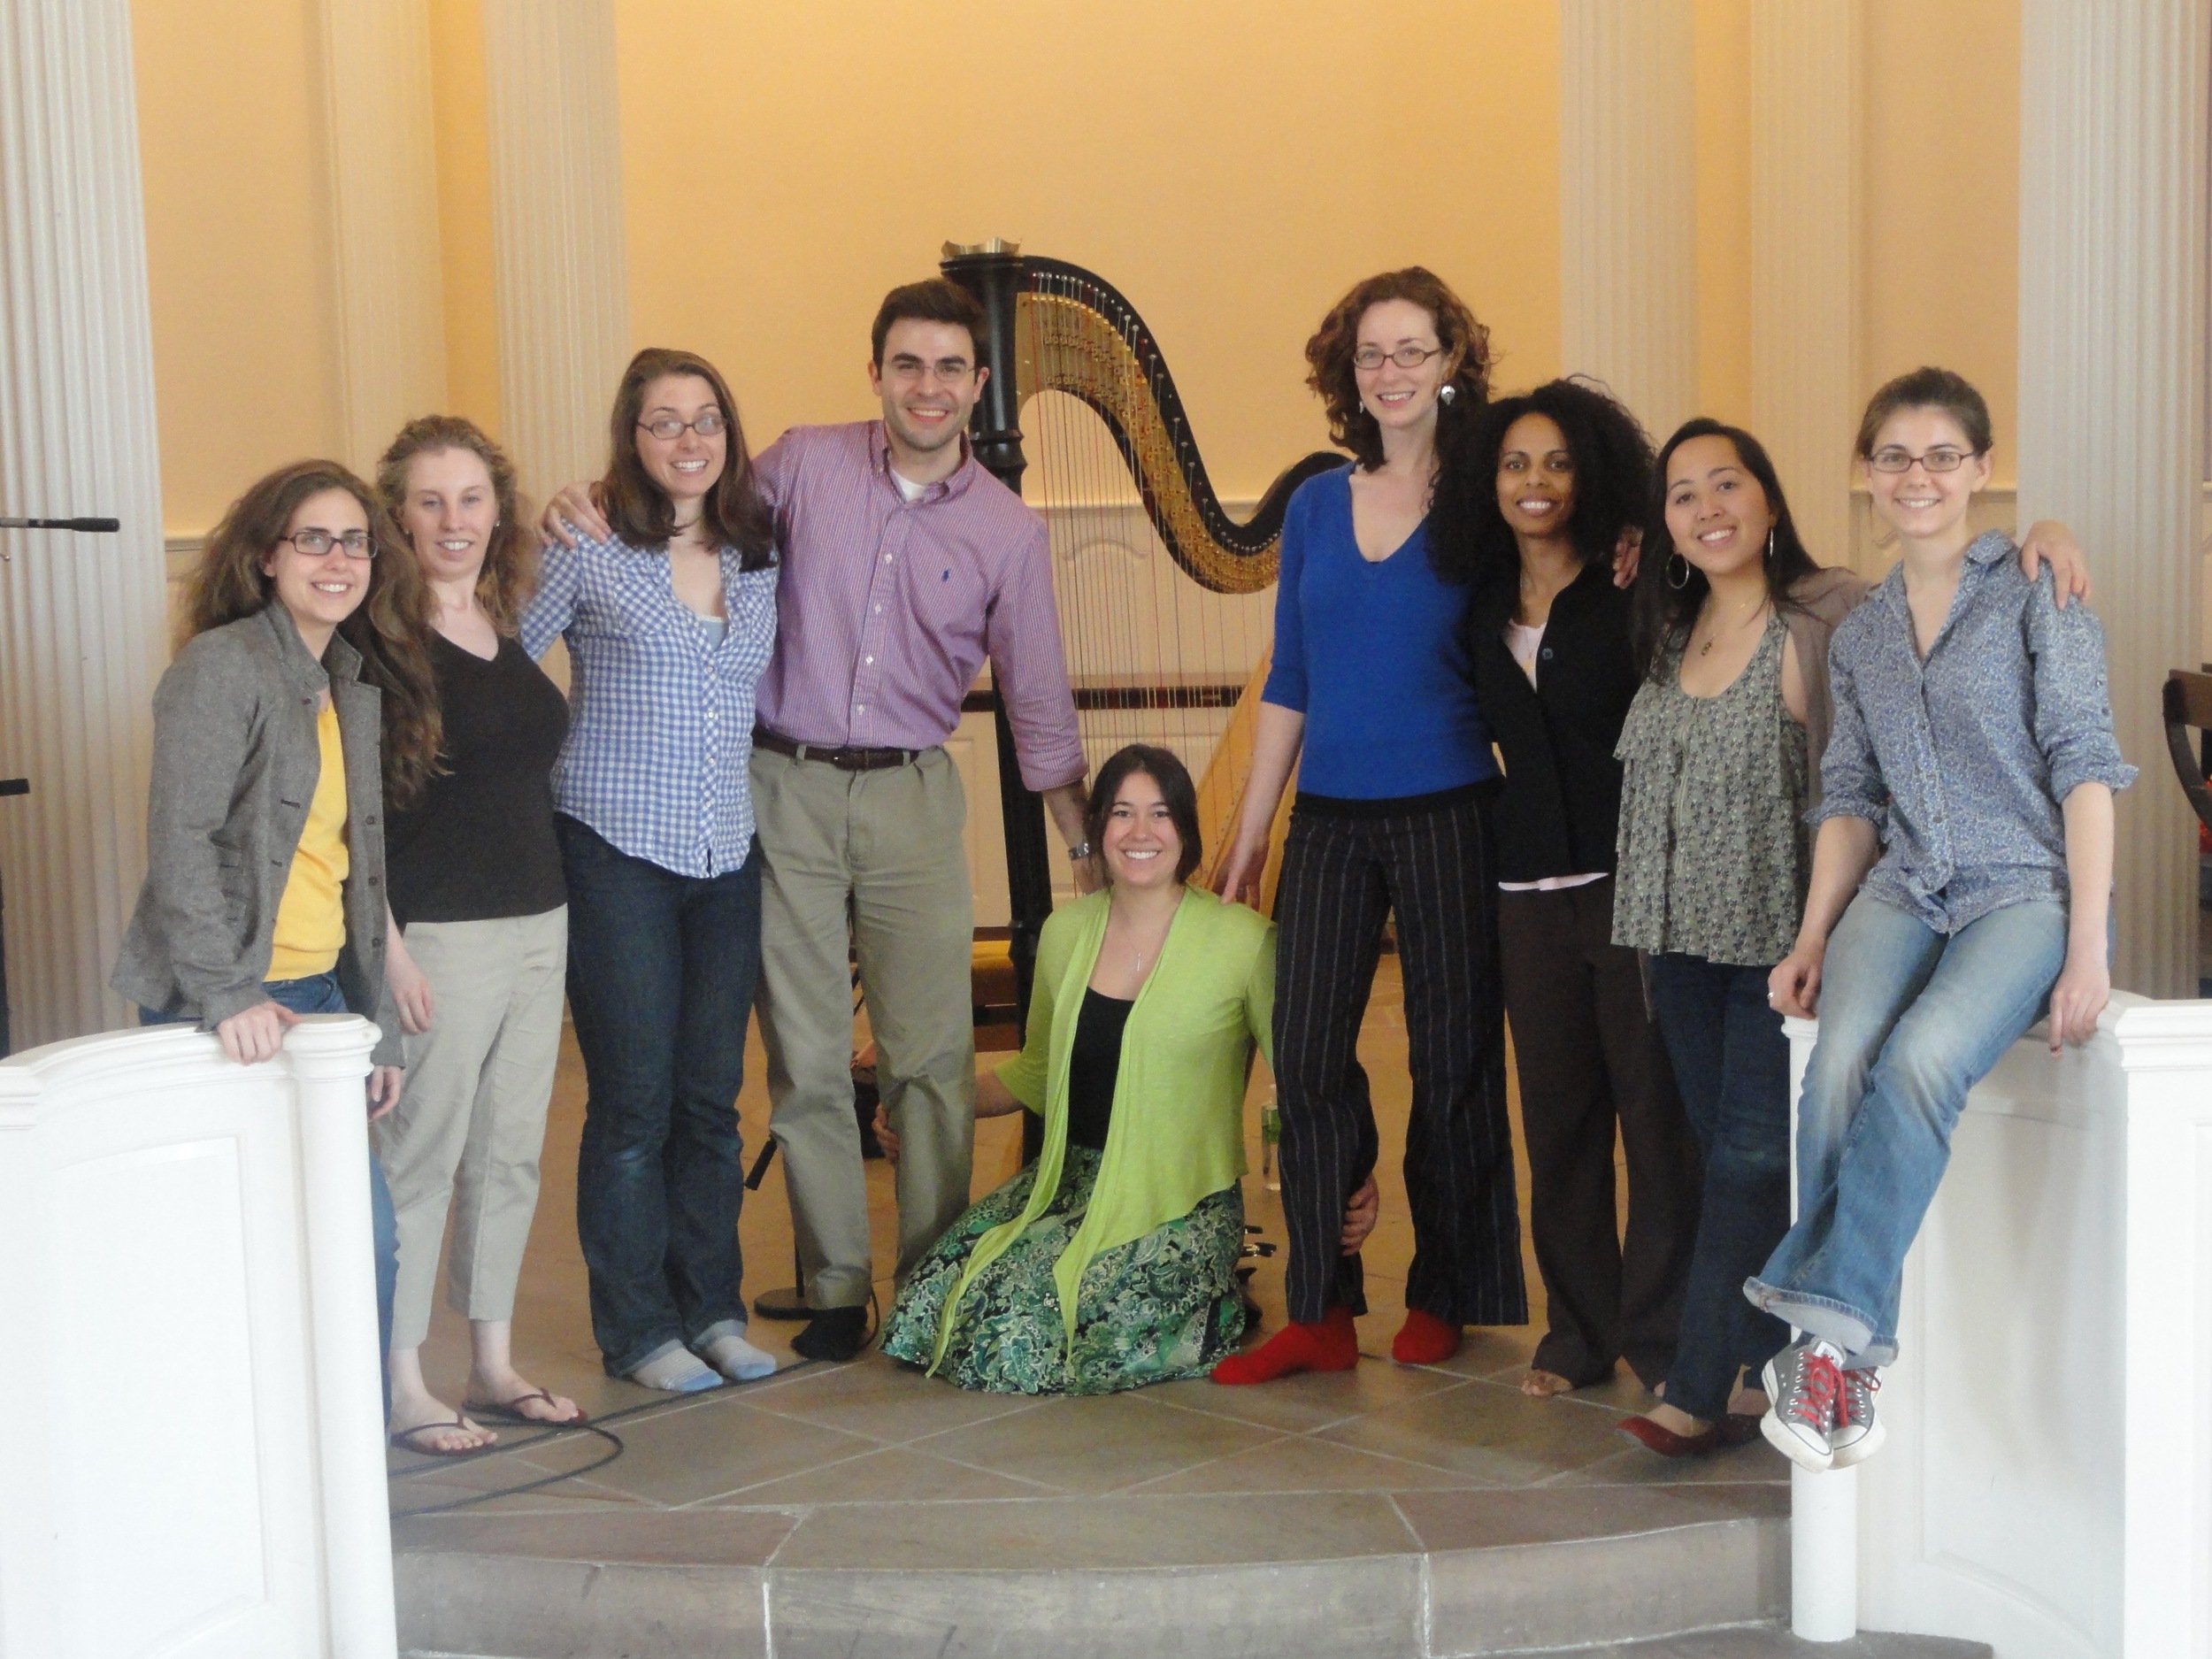 Etherea after completing recording on "Ceremony of Carols" in Marquand Chapel, Yale Divinity School